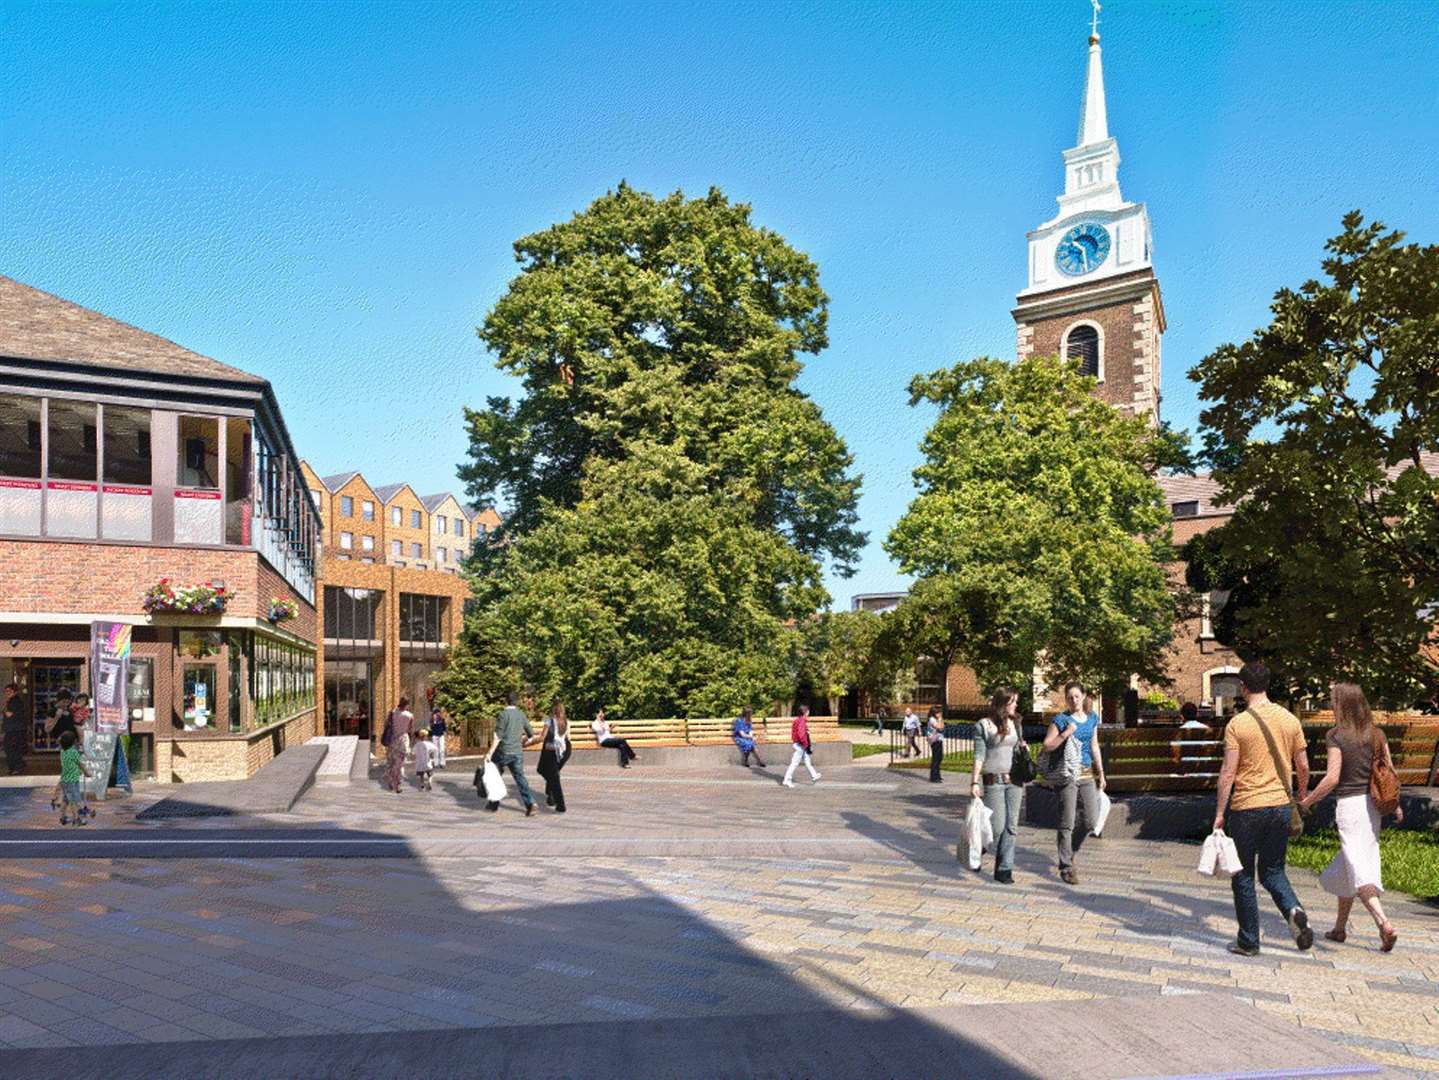 Another view of the proposed Heritage Quarter